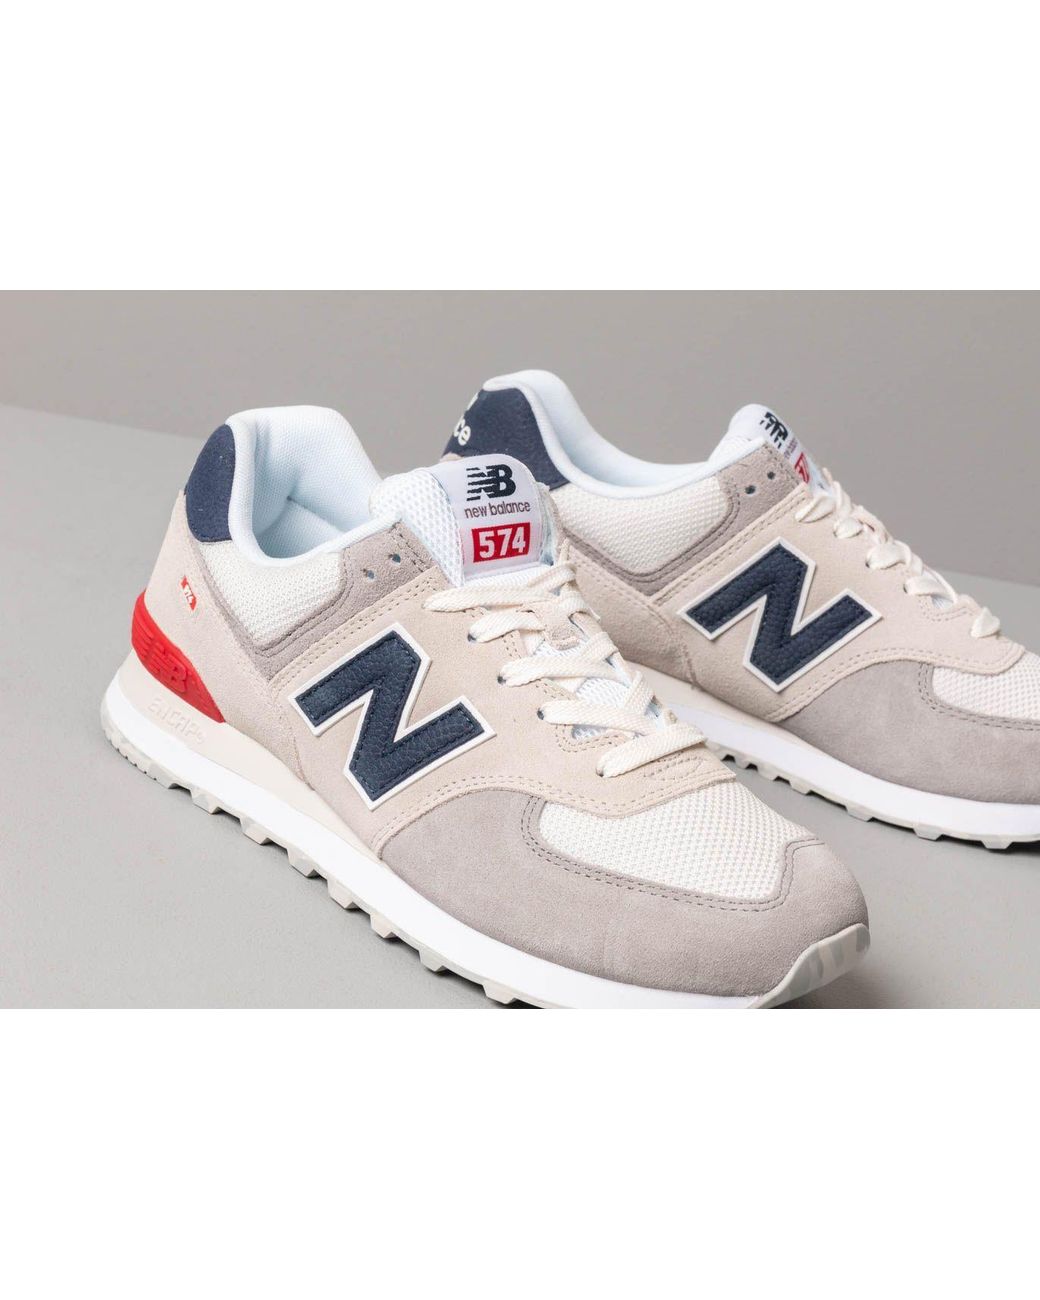 Quite stereo fiction new balance 574 red and grey Strengthen hat sleep